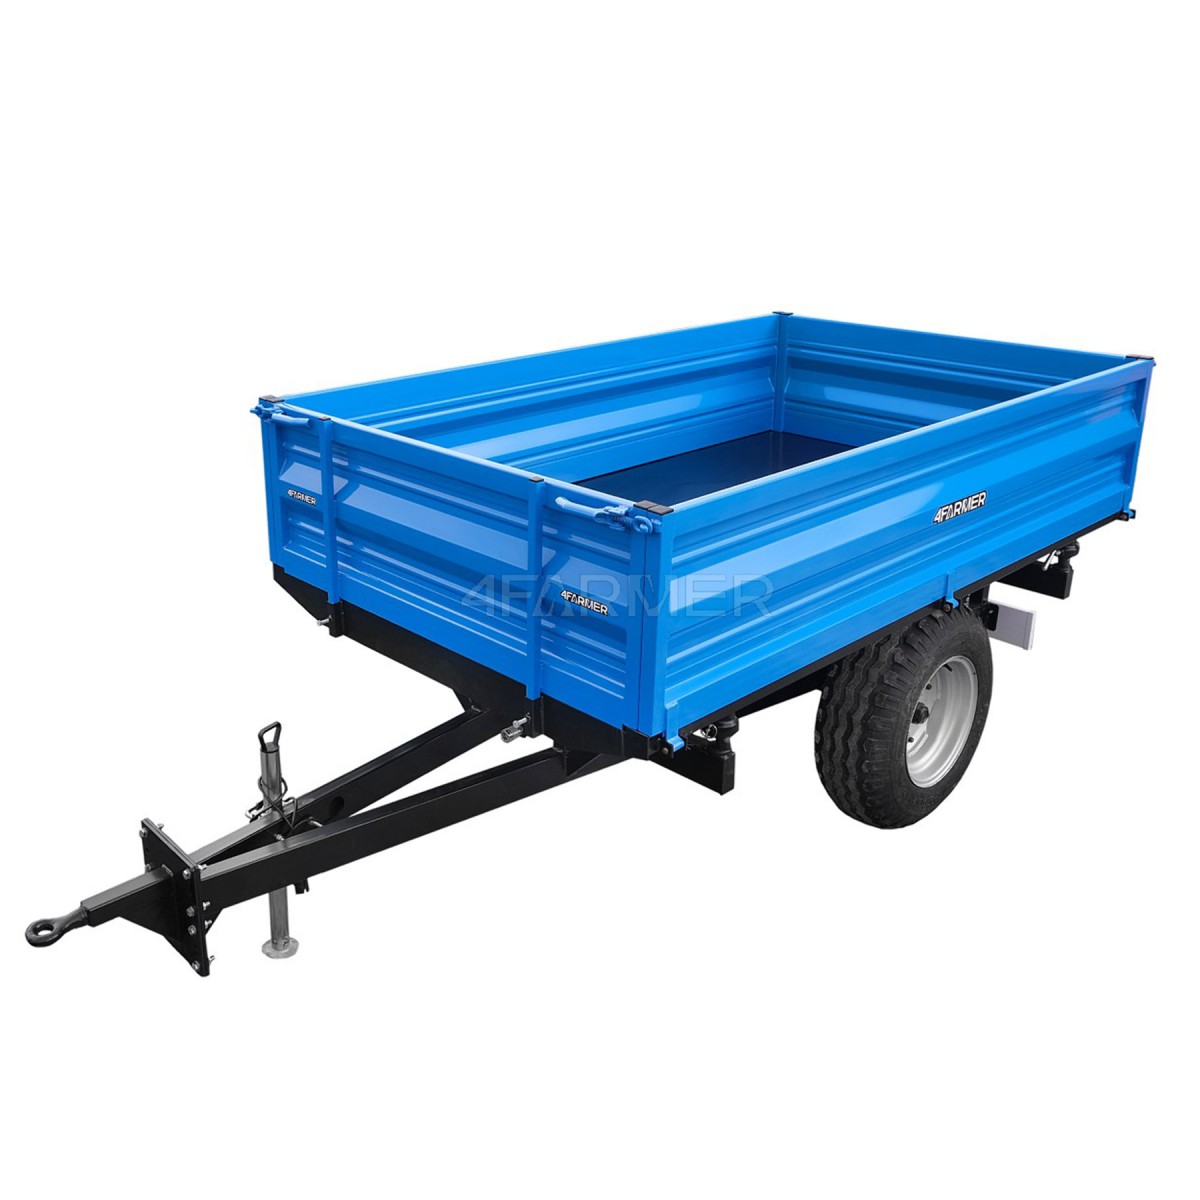 Single-axle agricultural trailer 2T with 4FARMER trailer